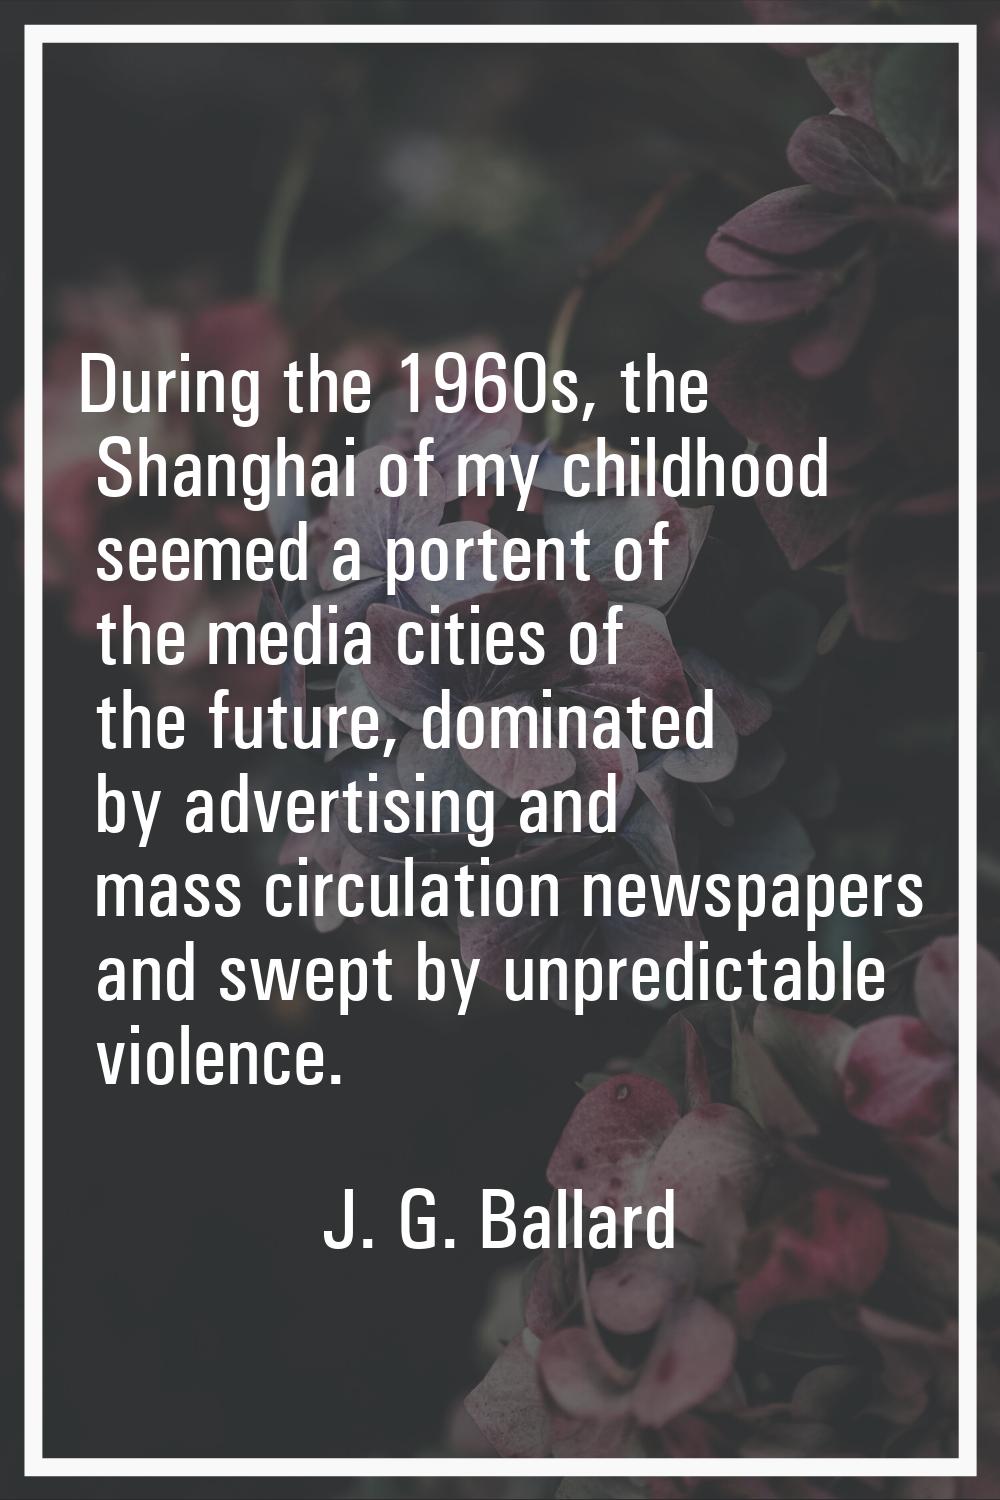 During the 1960s, the Shanghai of my childhood seemed a portent of the media cities of the future, 